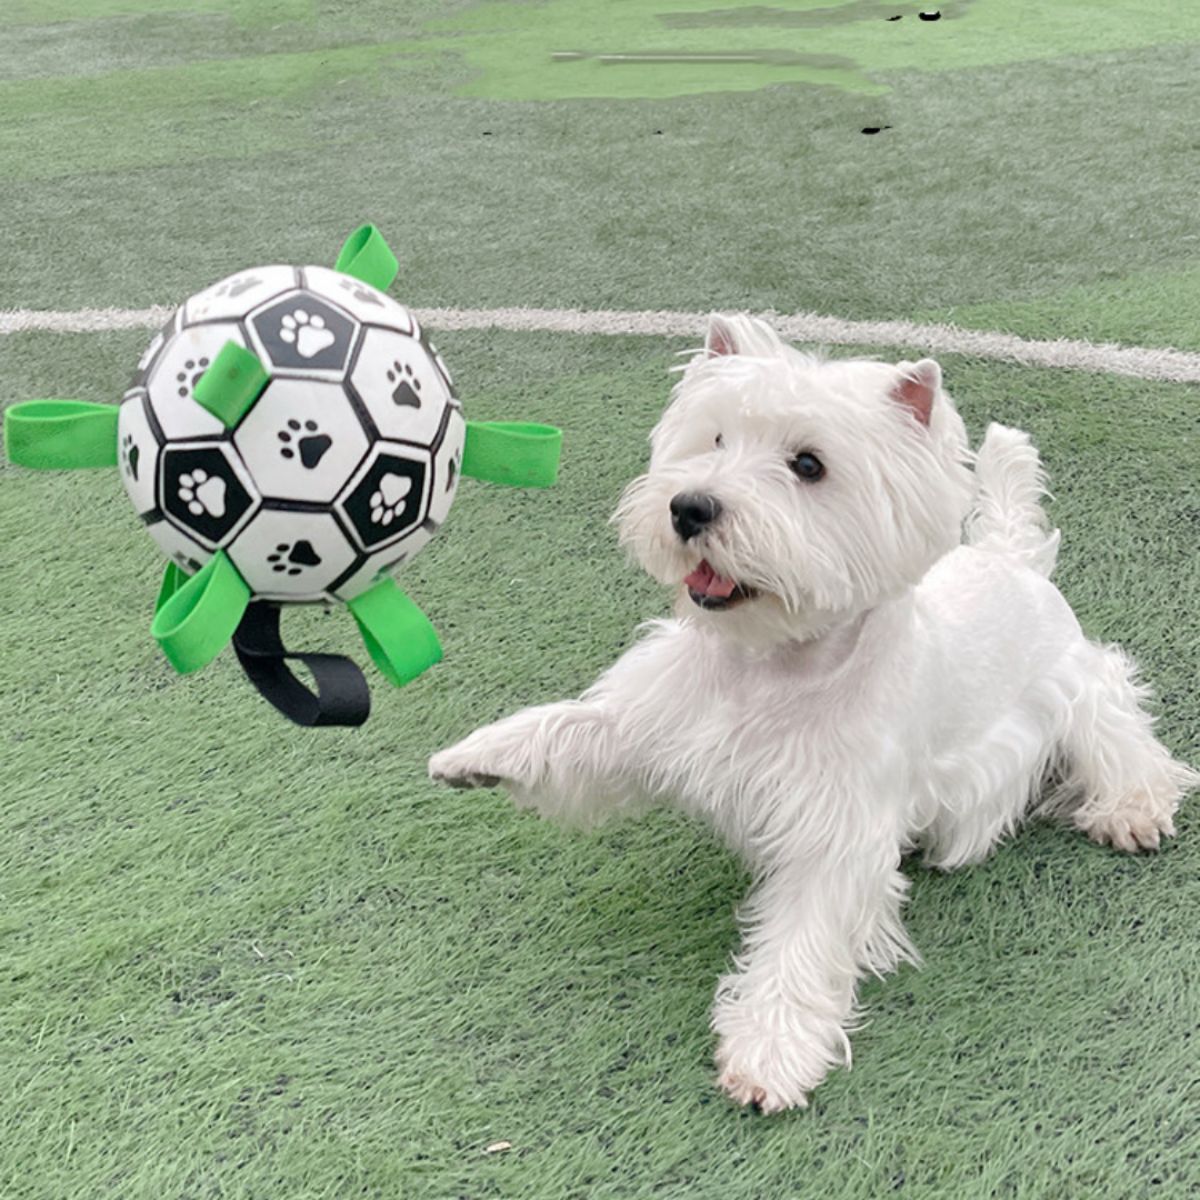 West highland white terrier playing with interactive dog toy Doggo Ball